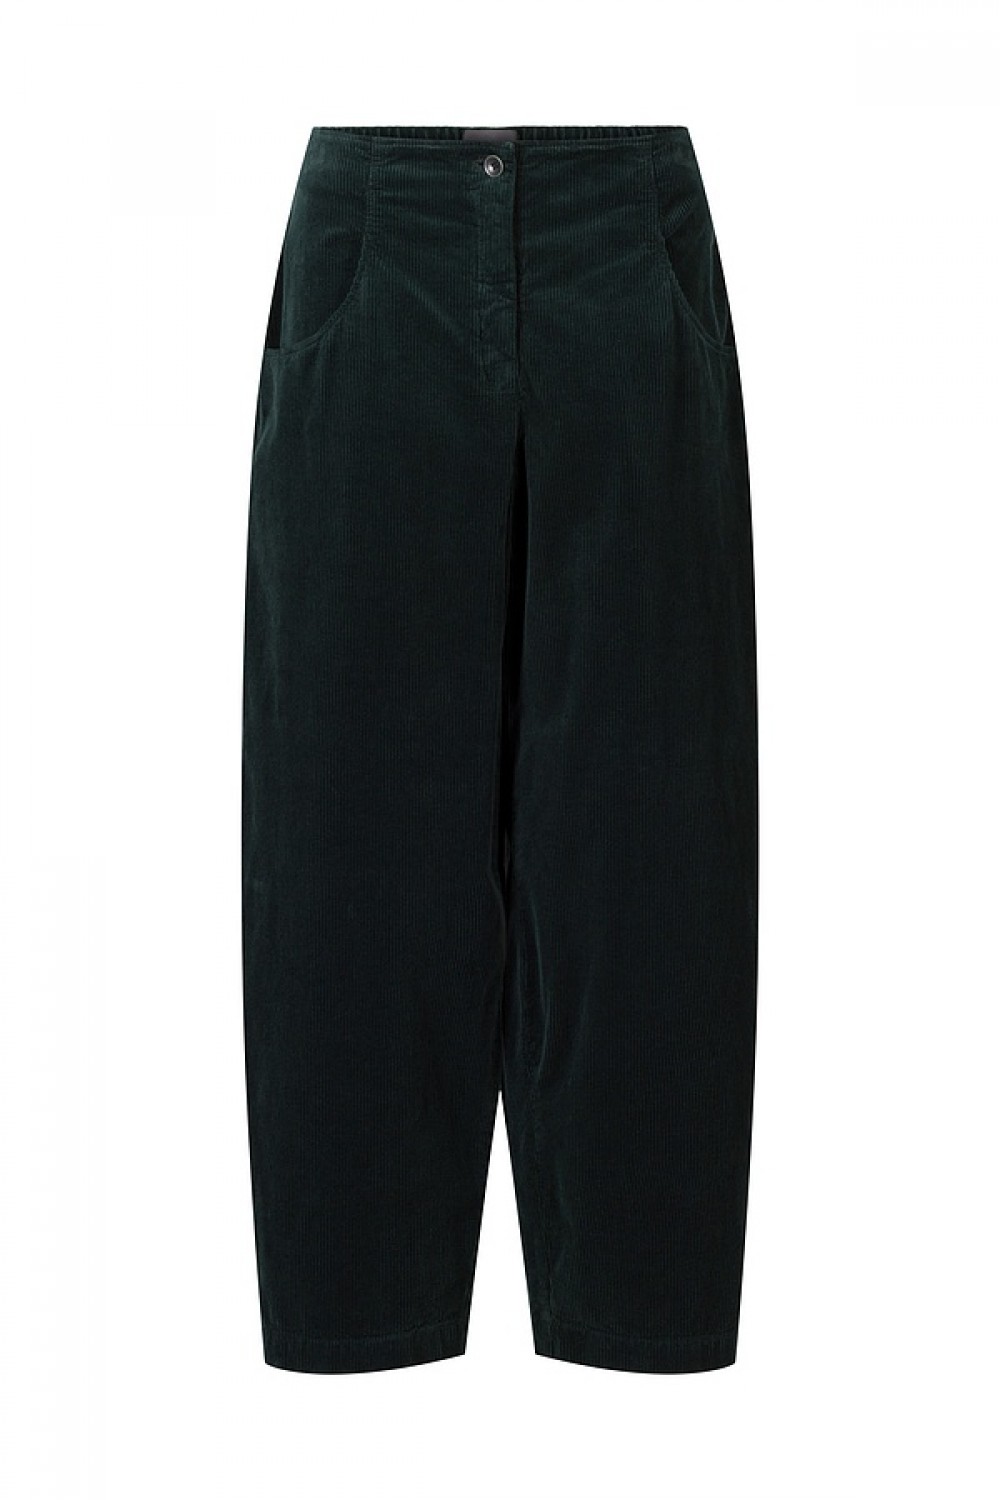 OSKA Trousers Kahren 314 Pond / Cotton Cord With Stretch Content